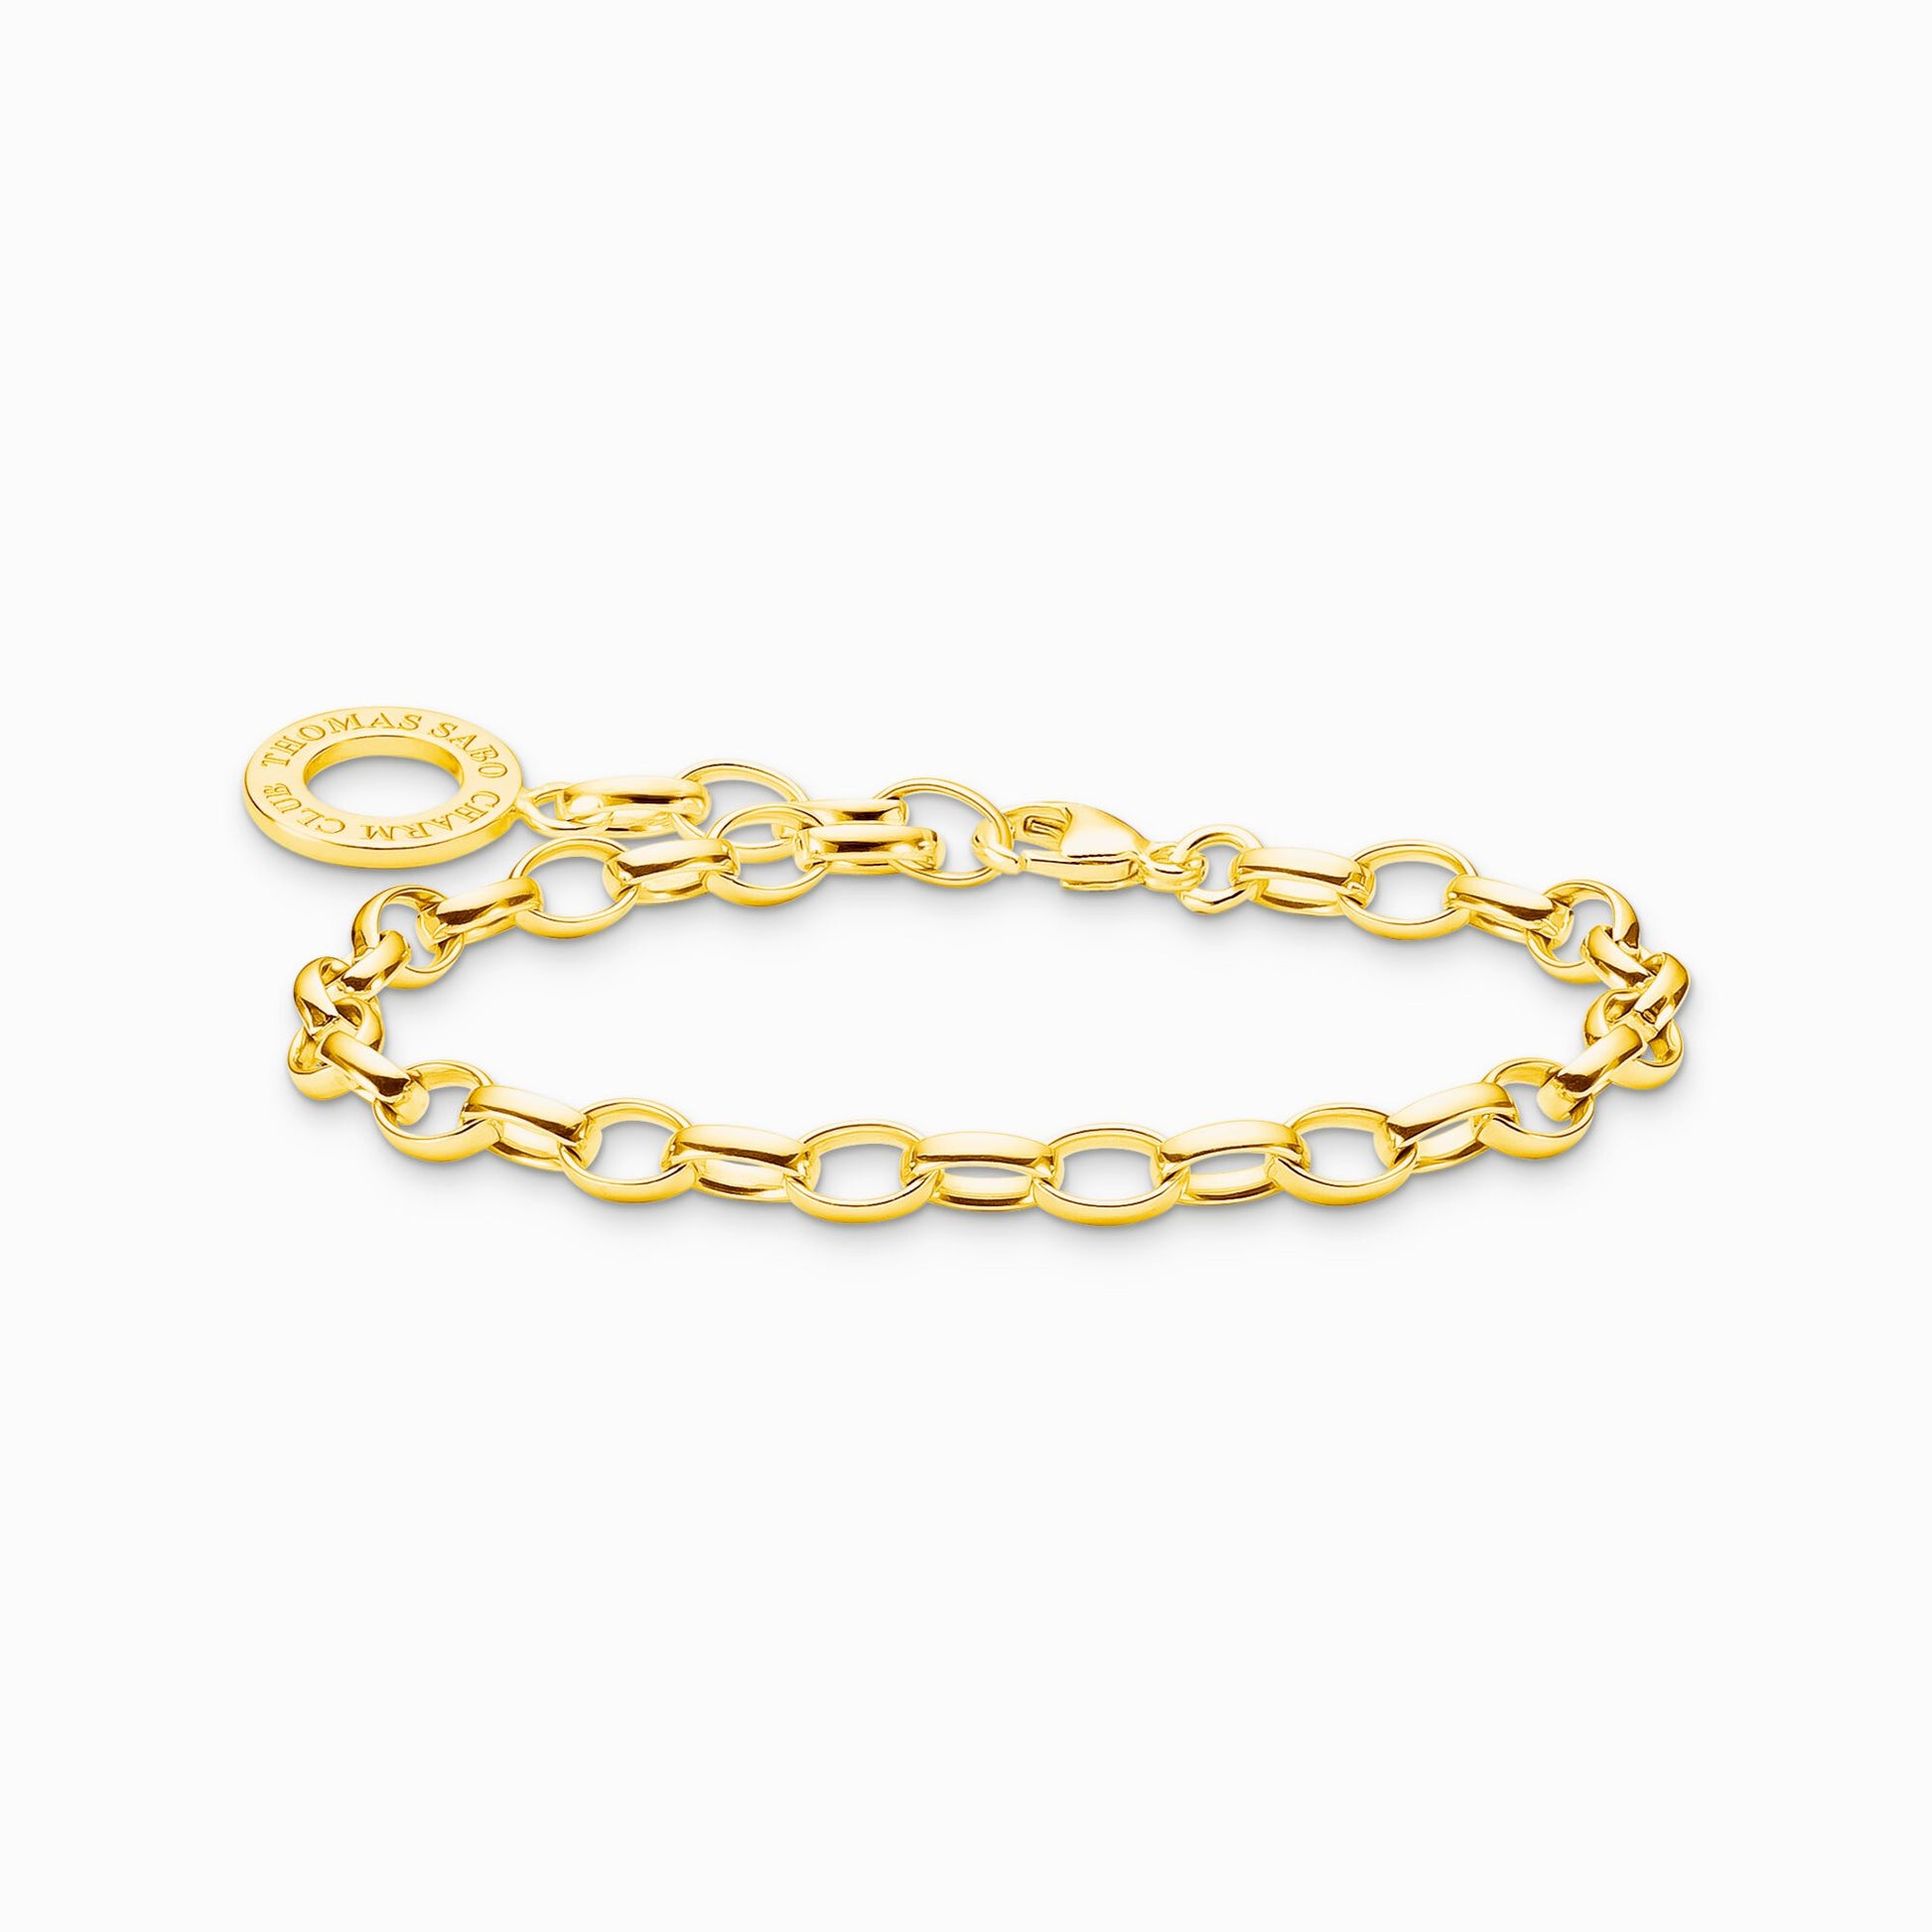 The top 10 jewellery charms to buy now